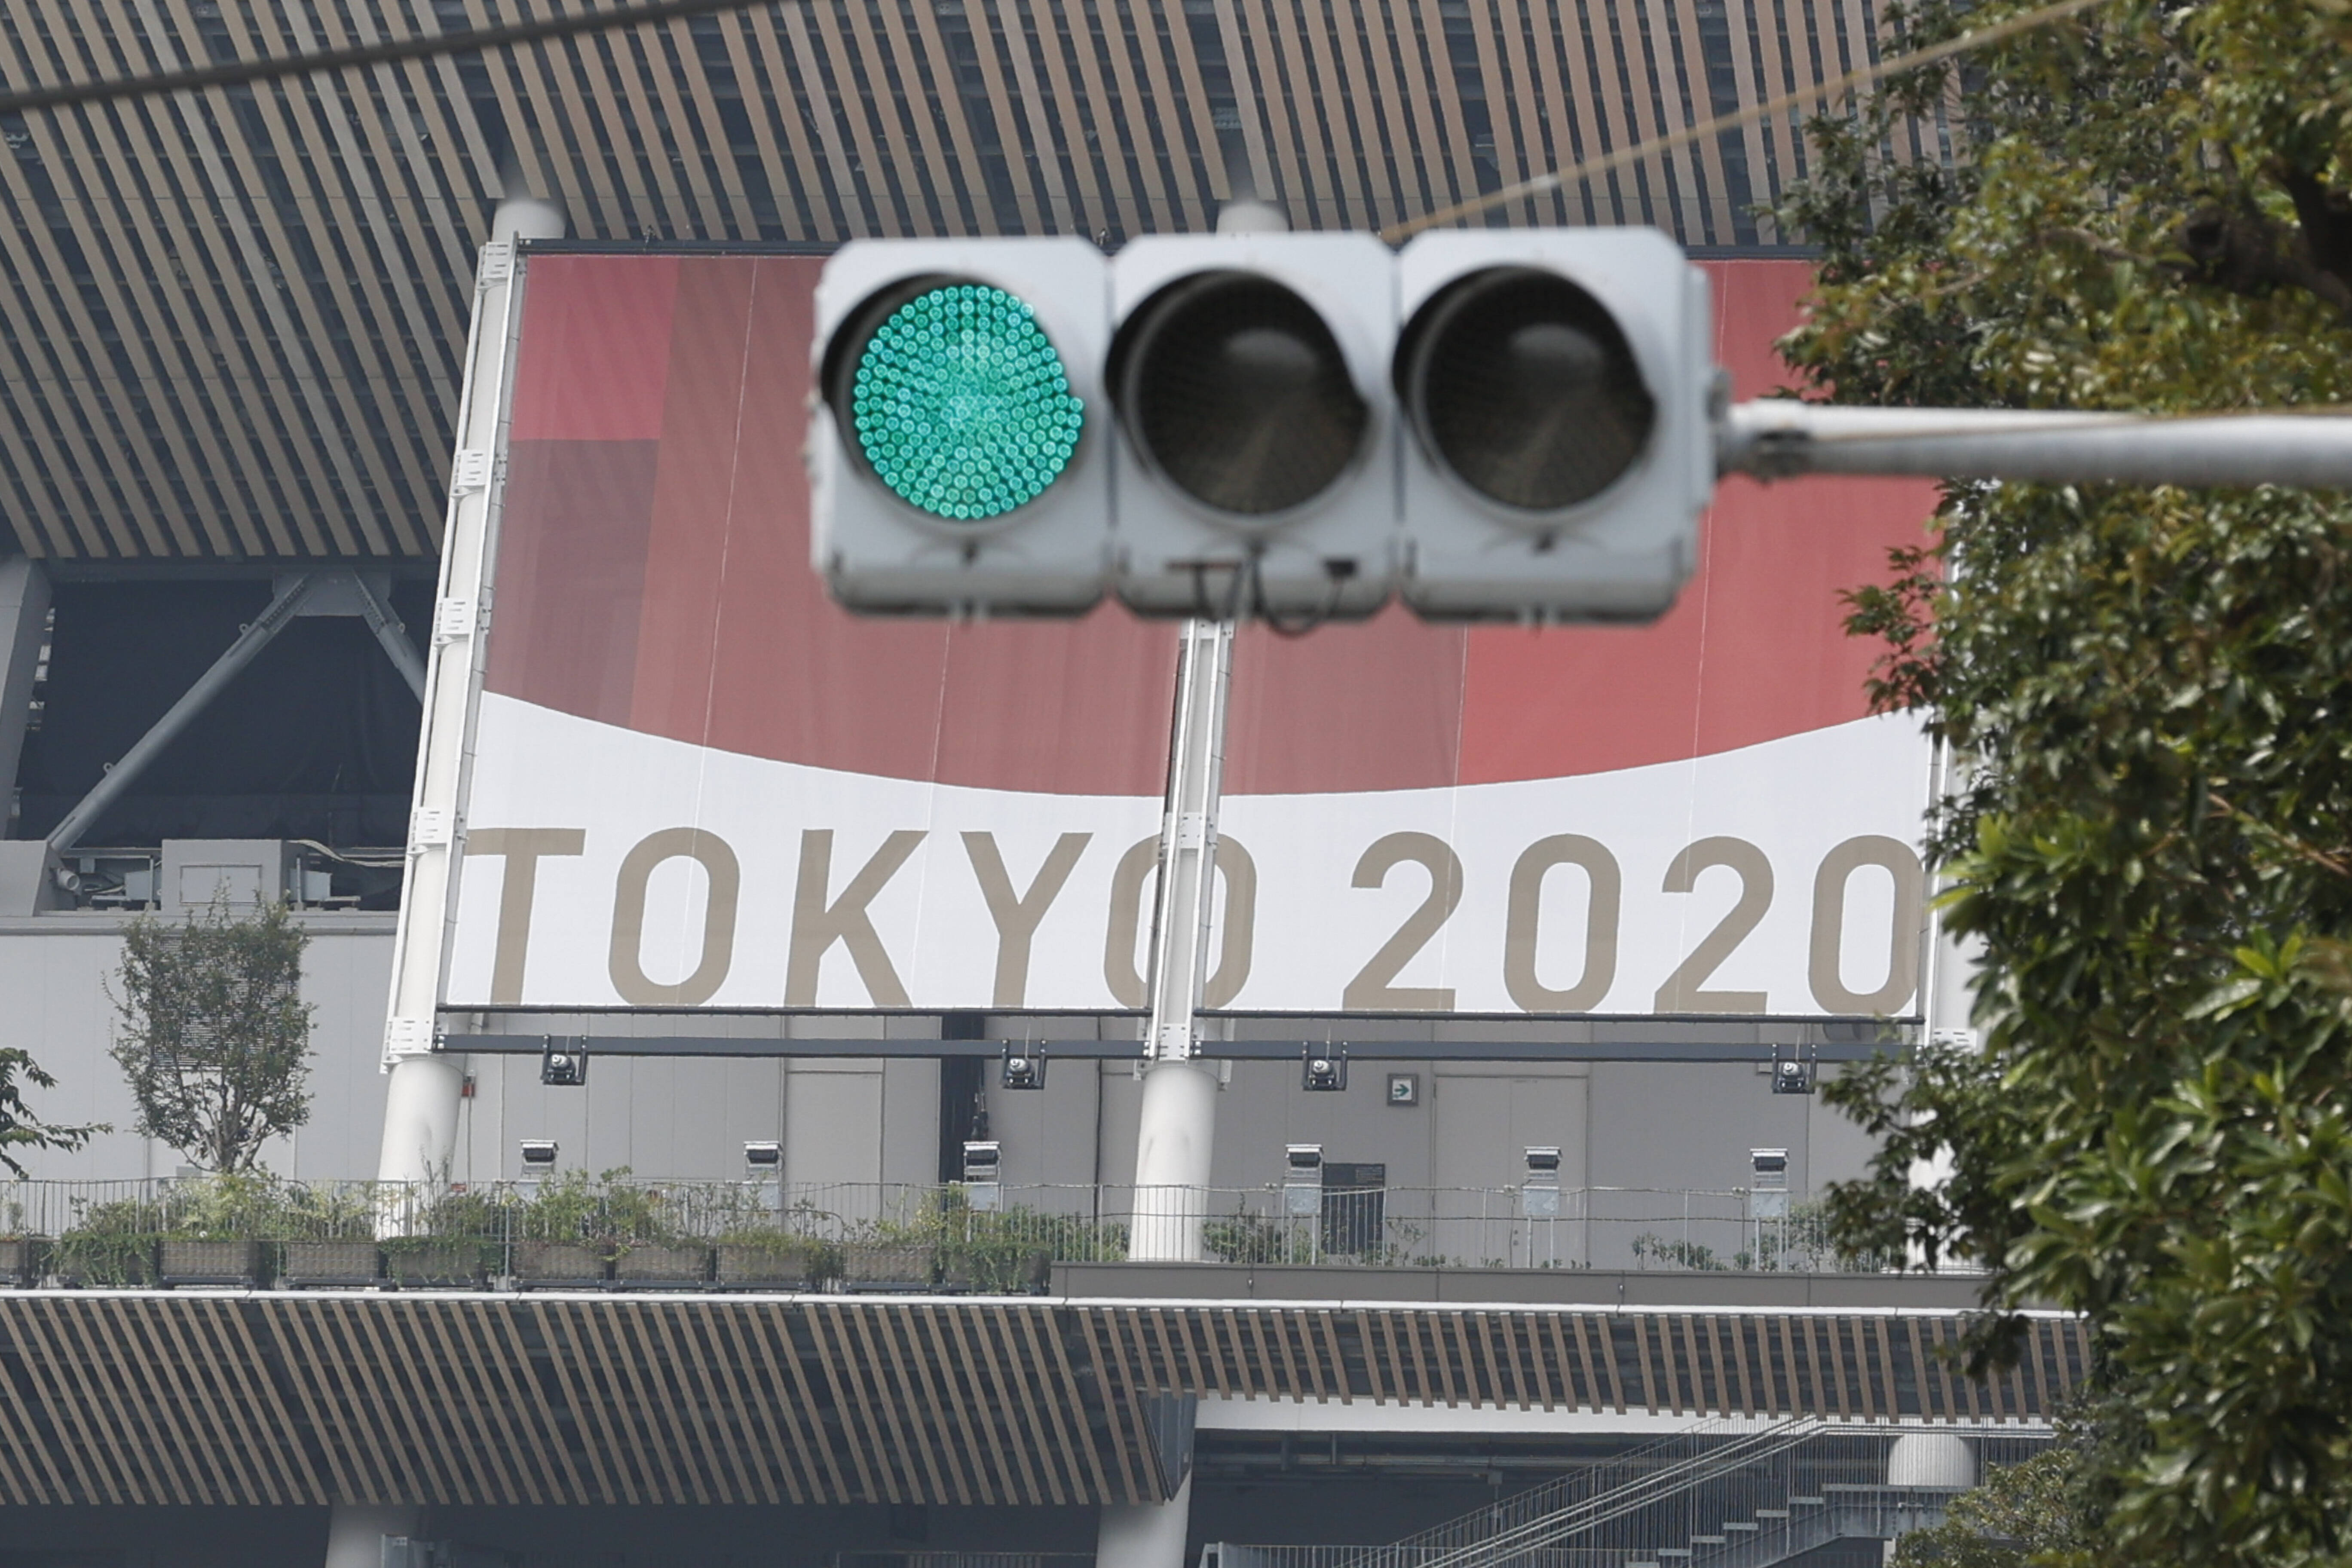 July 7, 2021, Tokyo, Japan: A Huge Banner Of Tokyo 2020 On Display At The National Stadium, The Main Venue For The Tokyo